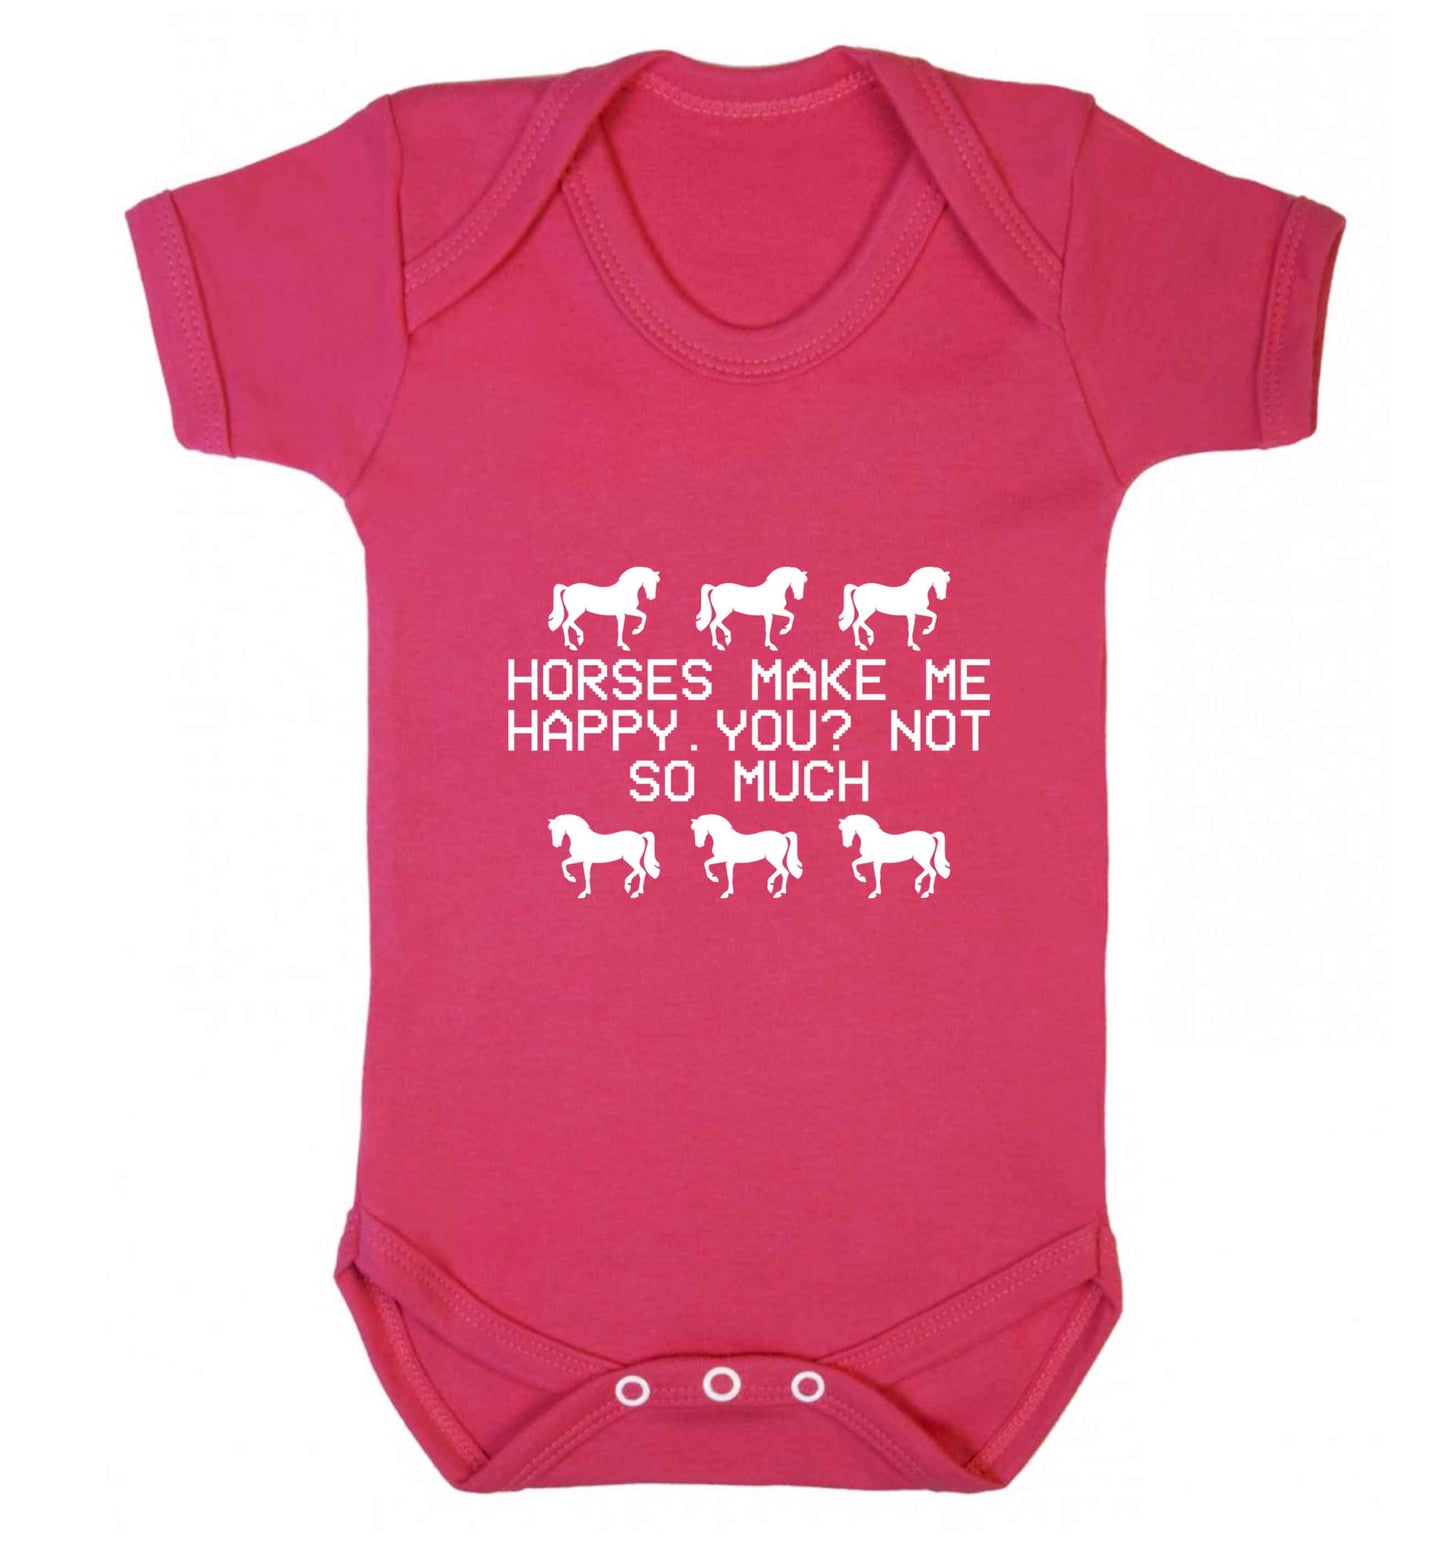 Horses make me happy, you not so much baby vest dark pink 18-24 months